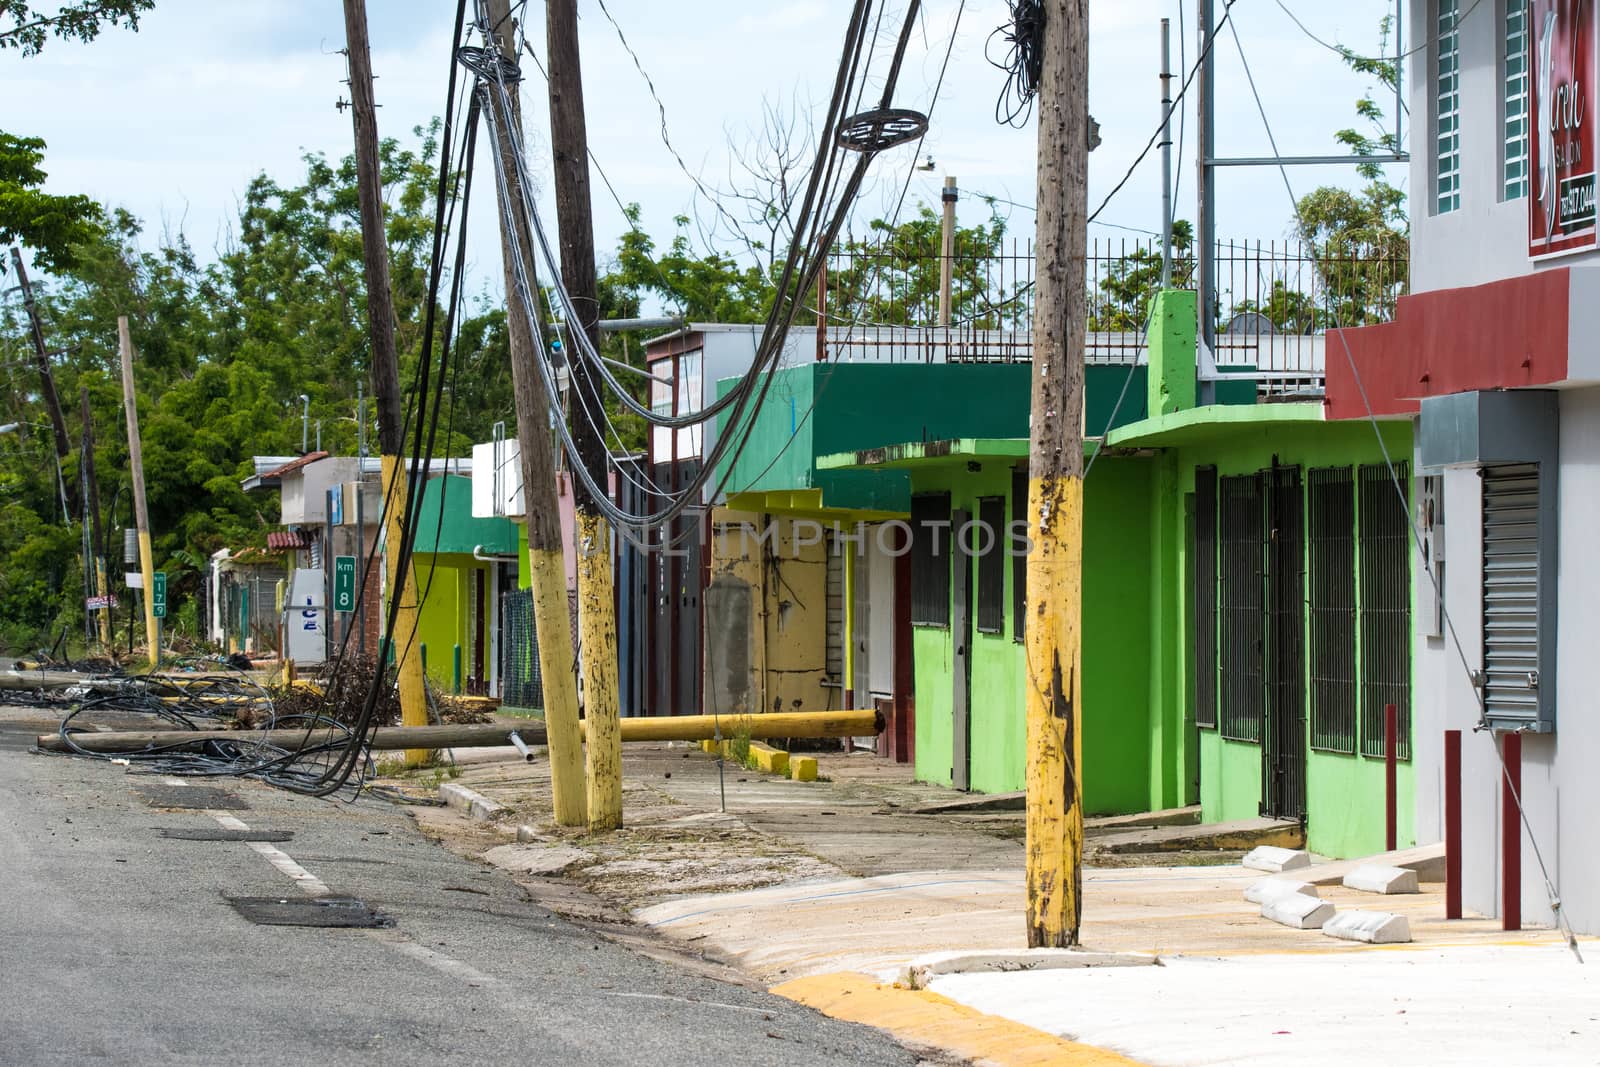 Roadside scene in Rincon, Puerto Rico after Hurricane Marie showing damage to businesses and power lines